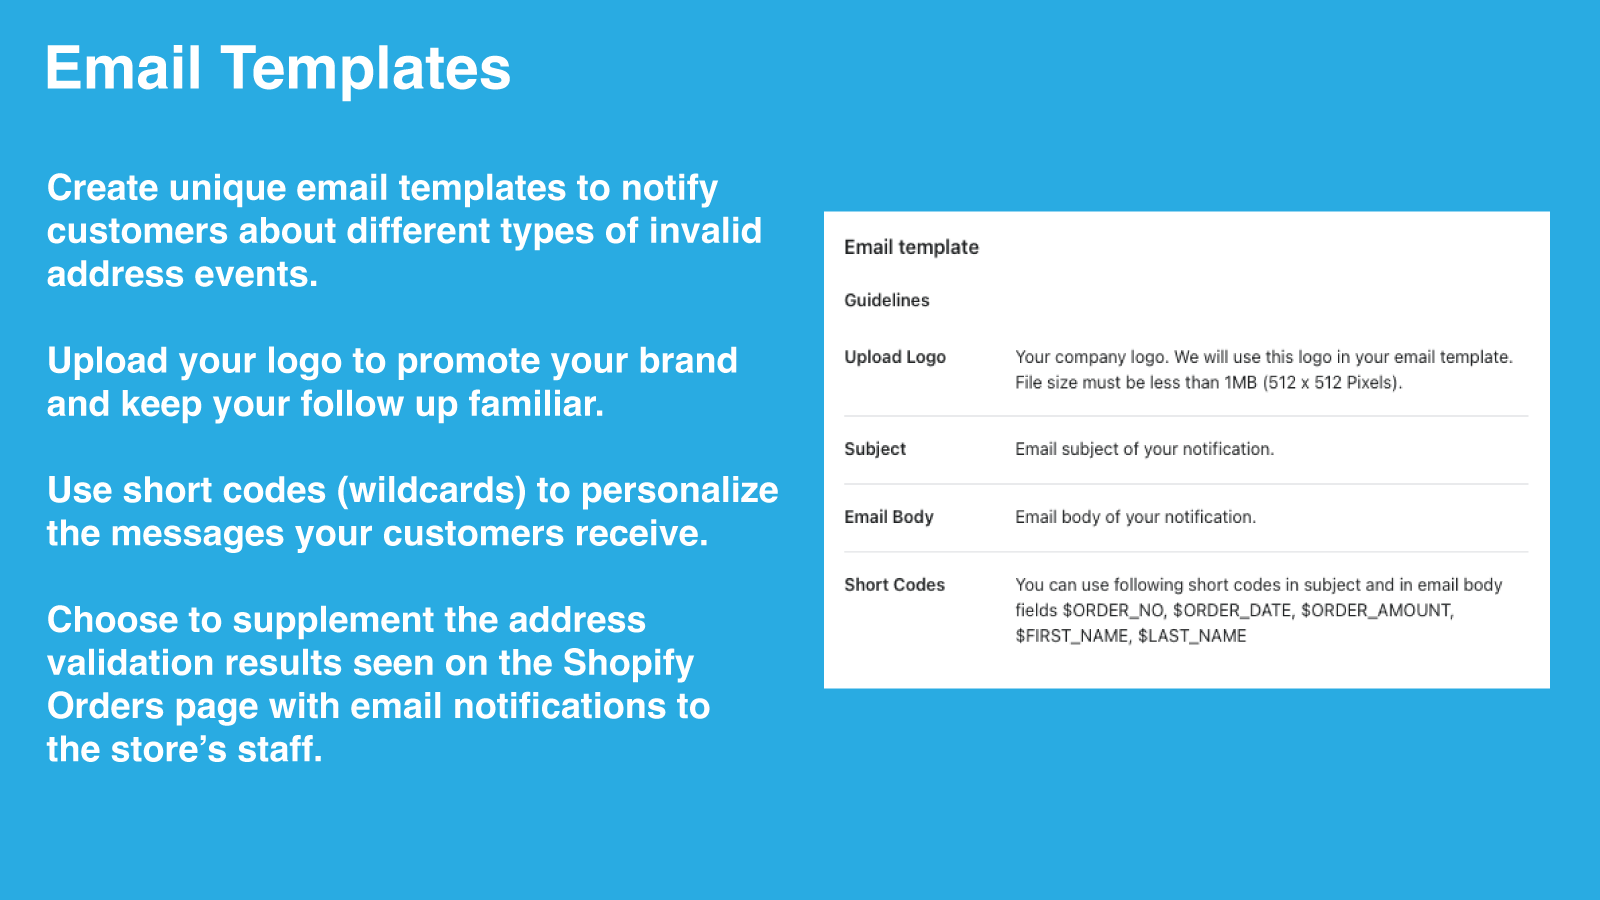 Validate Addresses email template highlights